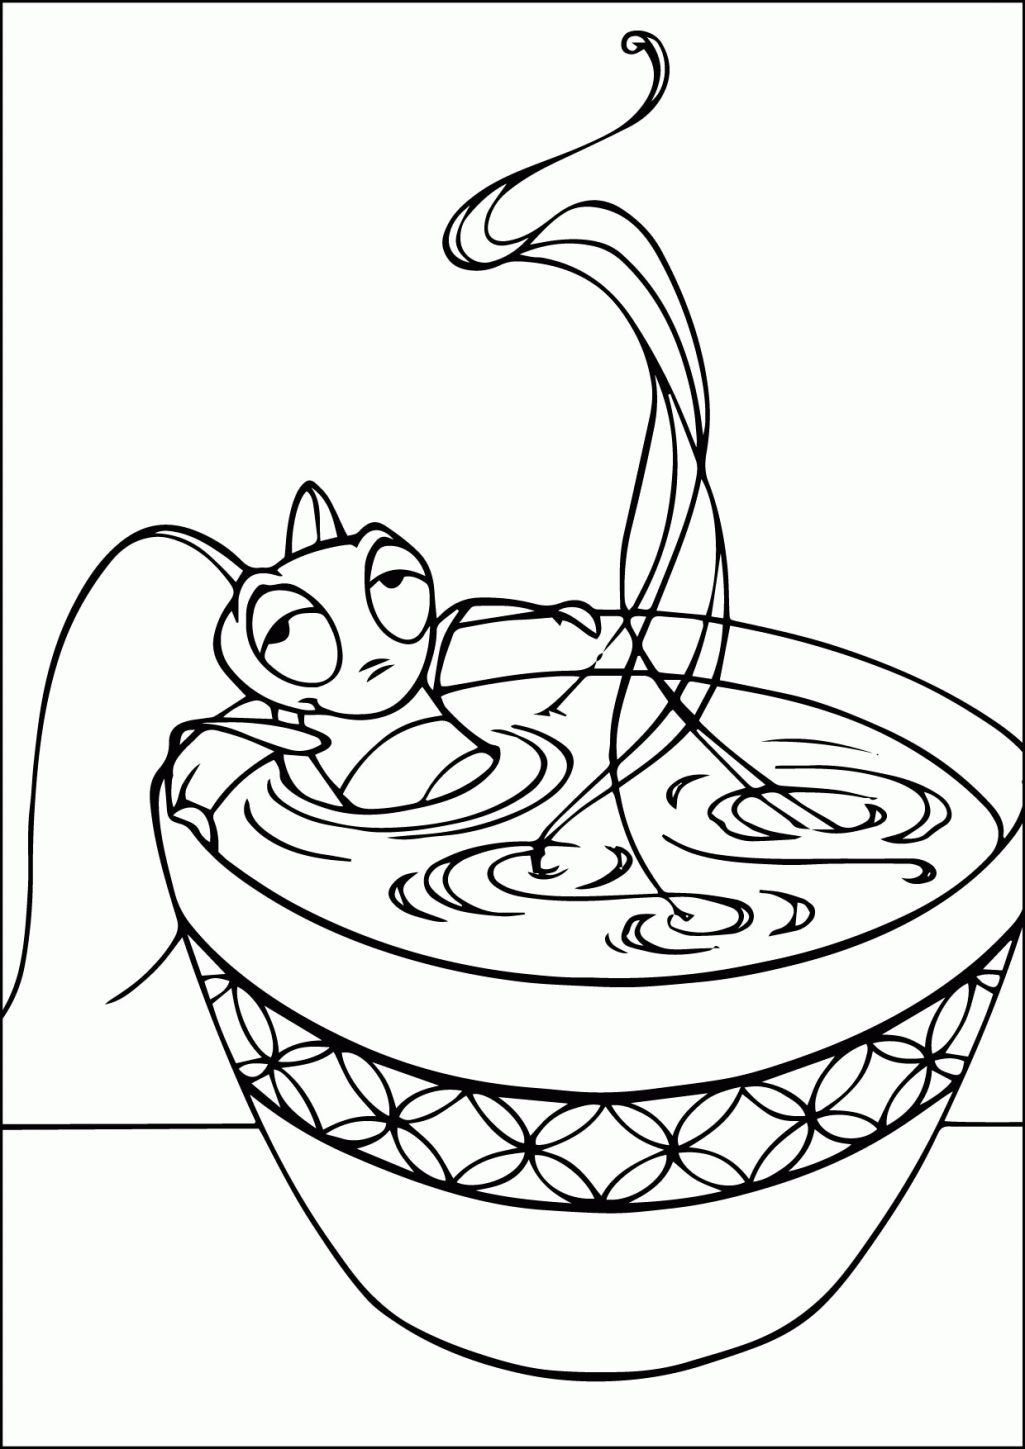 Free Coloring Pages Of Cute Qoutes Cute Coloring Pages For Your ...